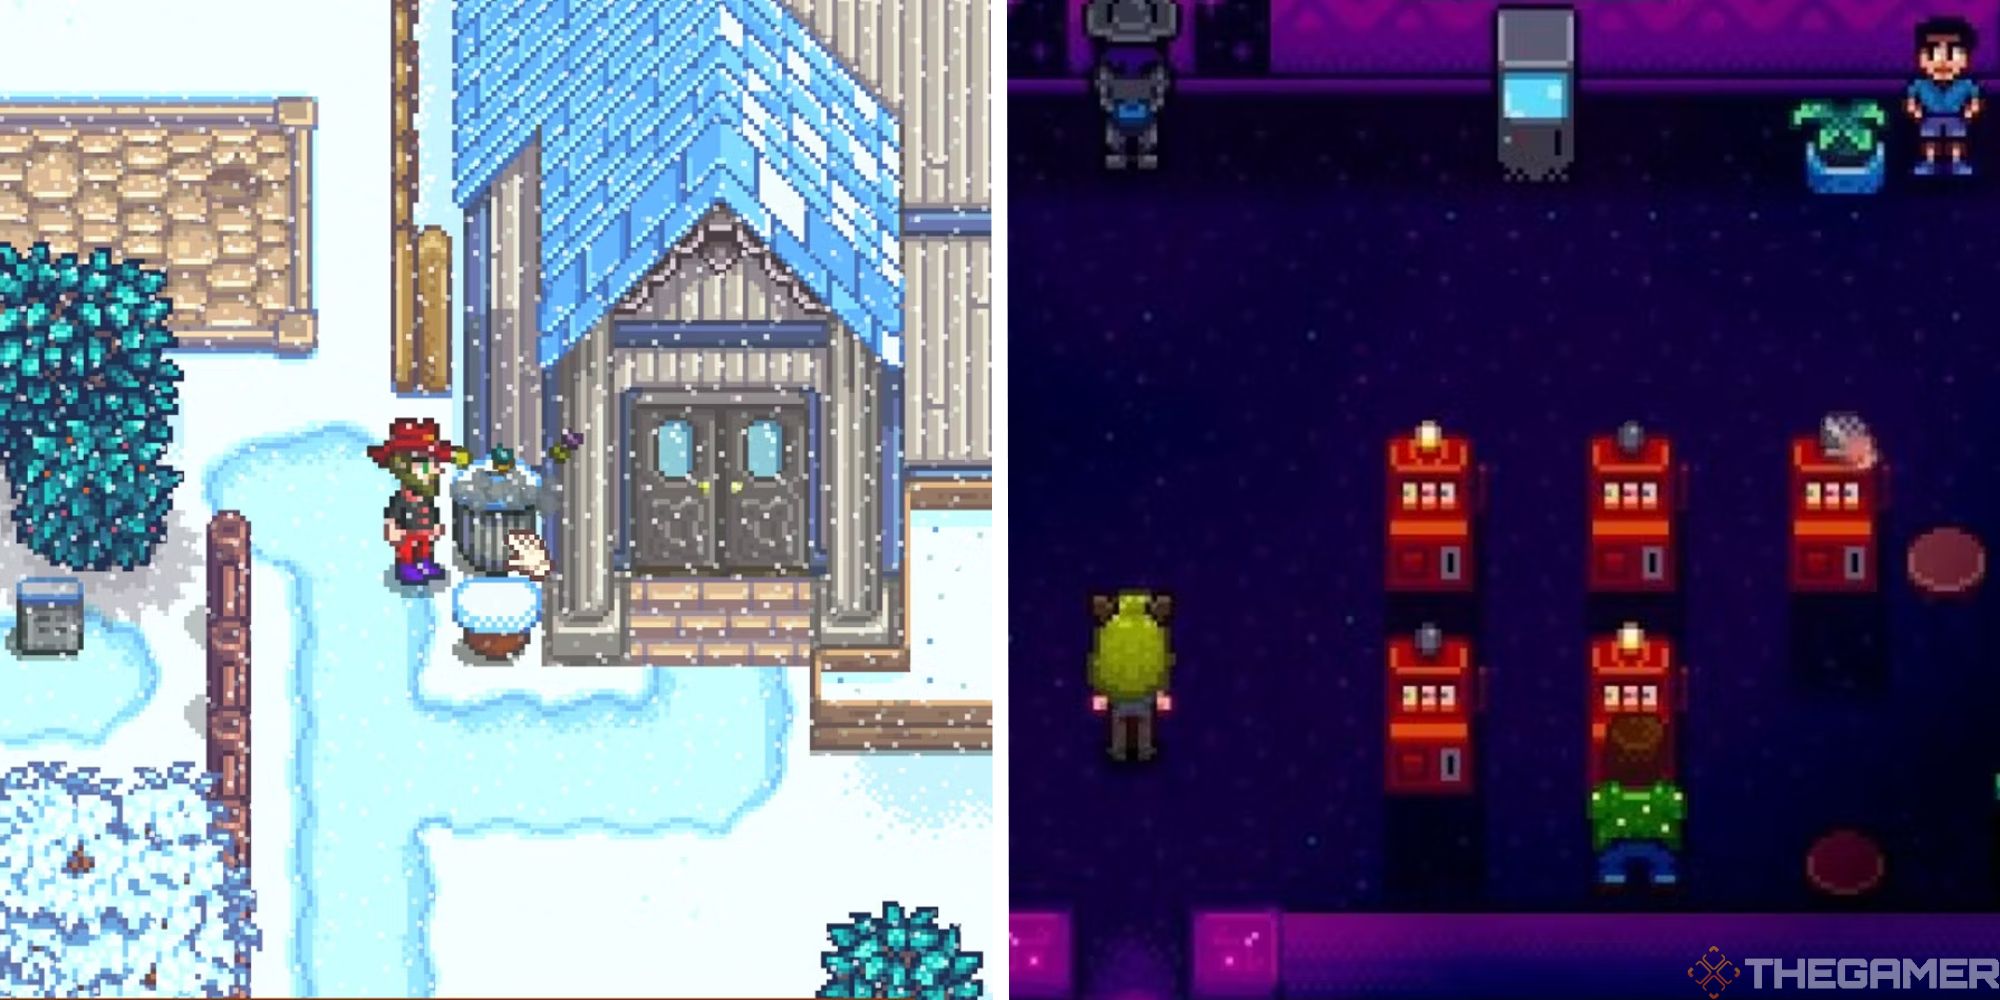 stardew valley split image showing person dig through the trash next to image of person standing in the casino